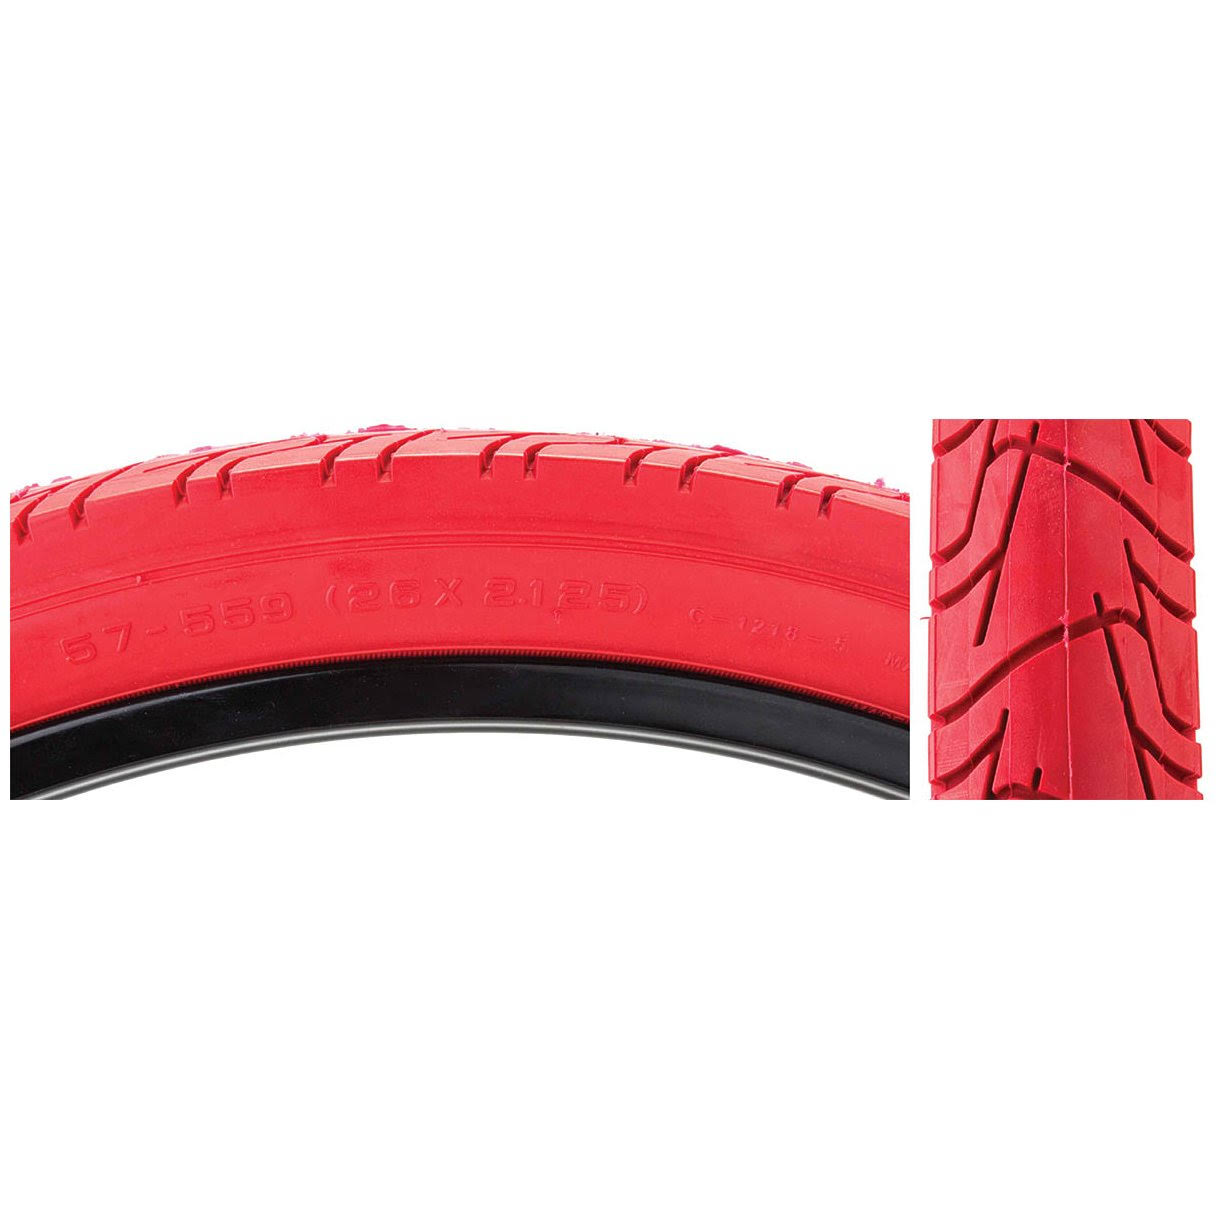 Sunlite City Cst1218 Tires - 26" x 2.125", Red/Red